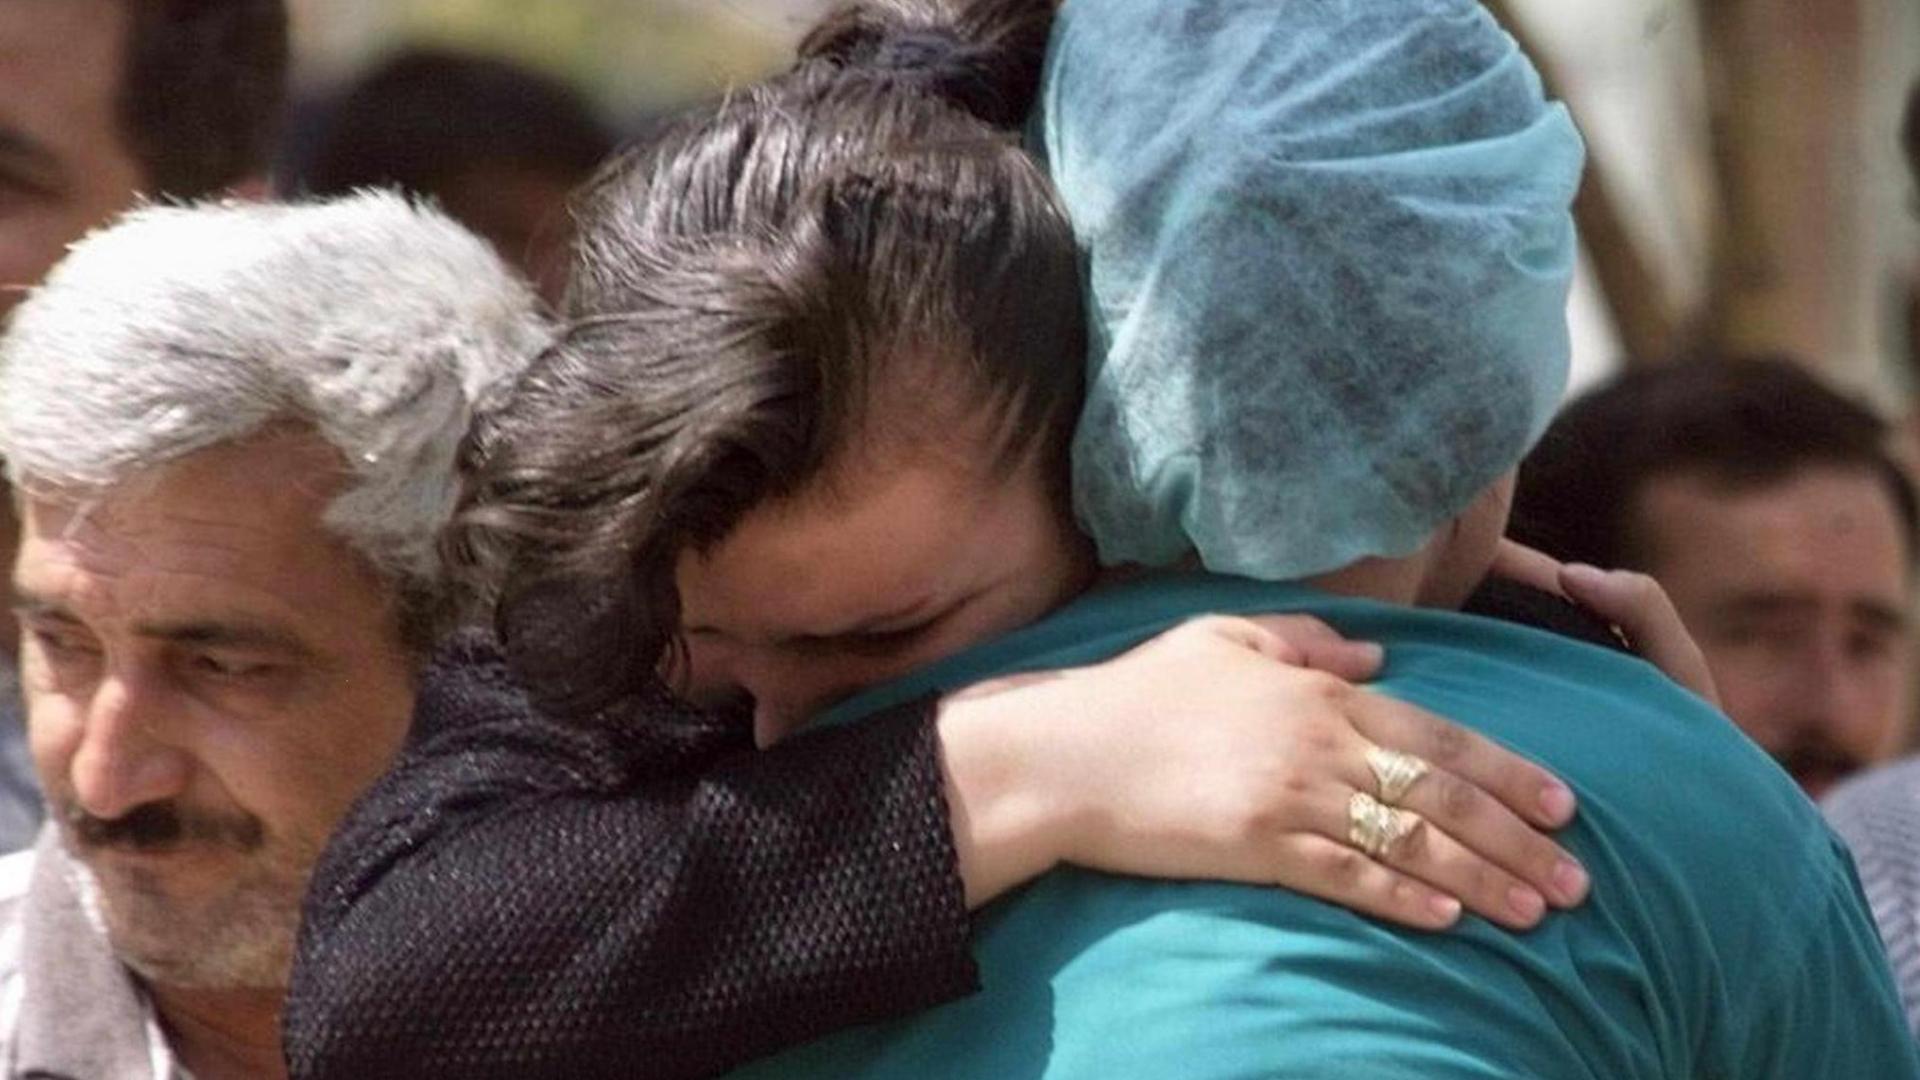 : Sena Bulte (C-L) an earthquake survivor is hugged by a relative 21 August 1999 in Izmit (over 100 kilometers east of Istanbul). Bulte was taken out of the rubbles of her house yesterday. The death toll of the quake stands over 12.000 dead and 33.500 wounded according to figures released today by the Turkish government crisis center. (ELECTRONIC IMAGE) dpa |